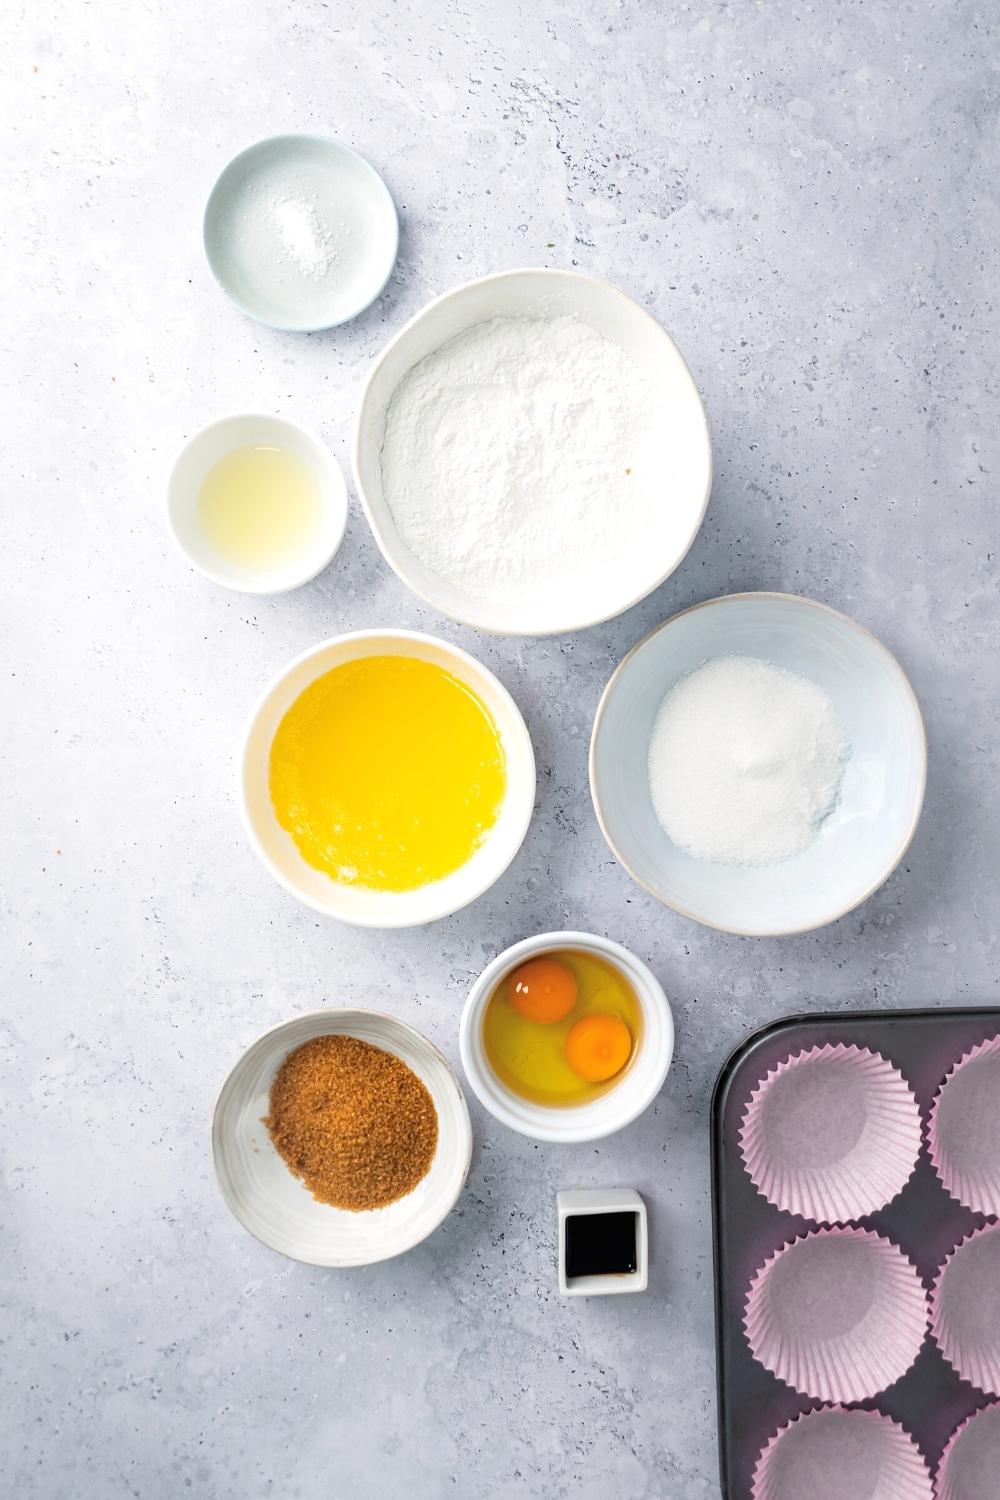 A bowl of brown sugar, a bowl of two eggs, a bowl of sugar, a bowl of melted butter, a bowl of flour, and a bowl of salt all on a white counter.